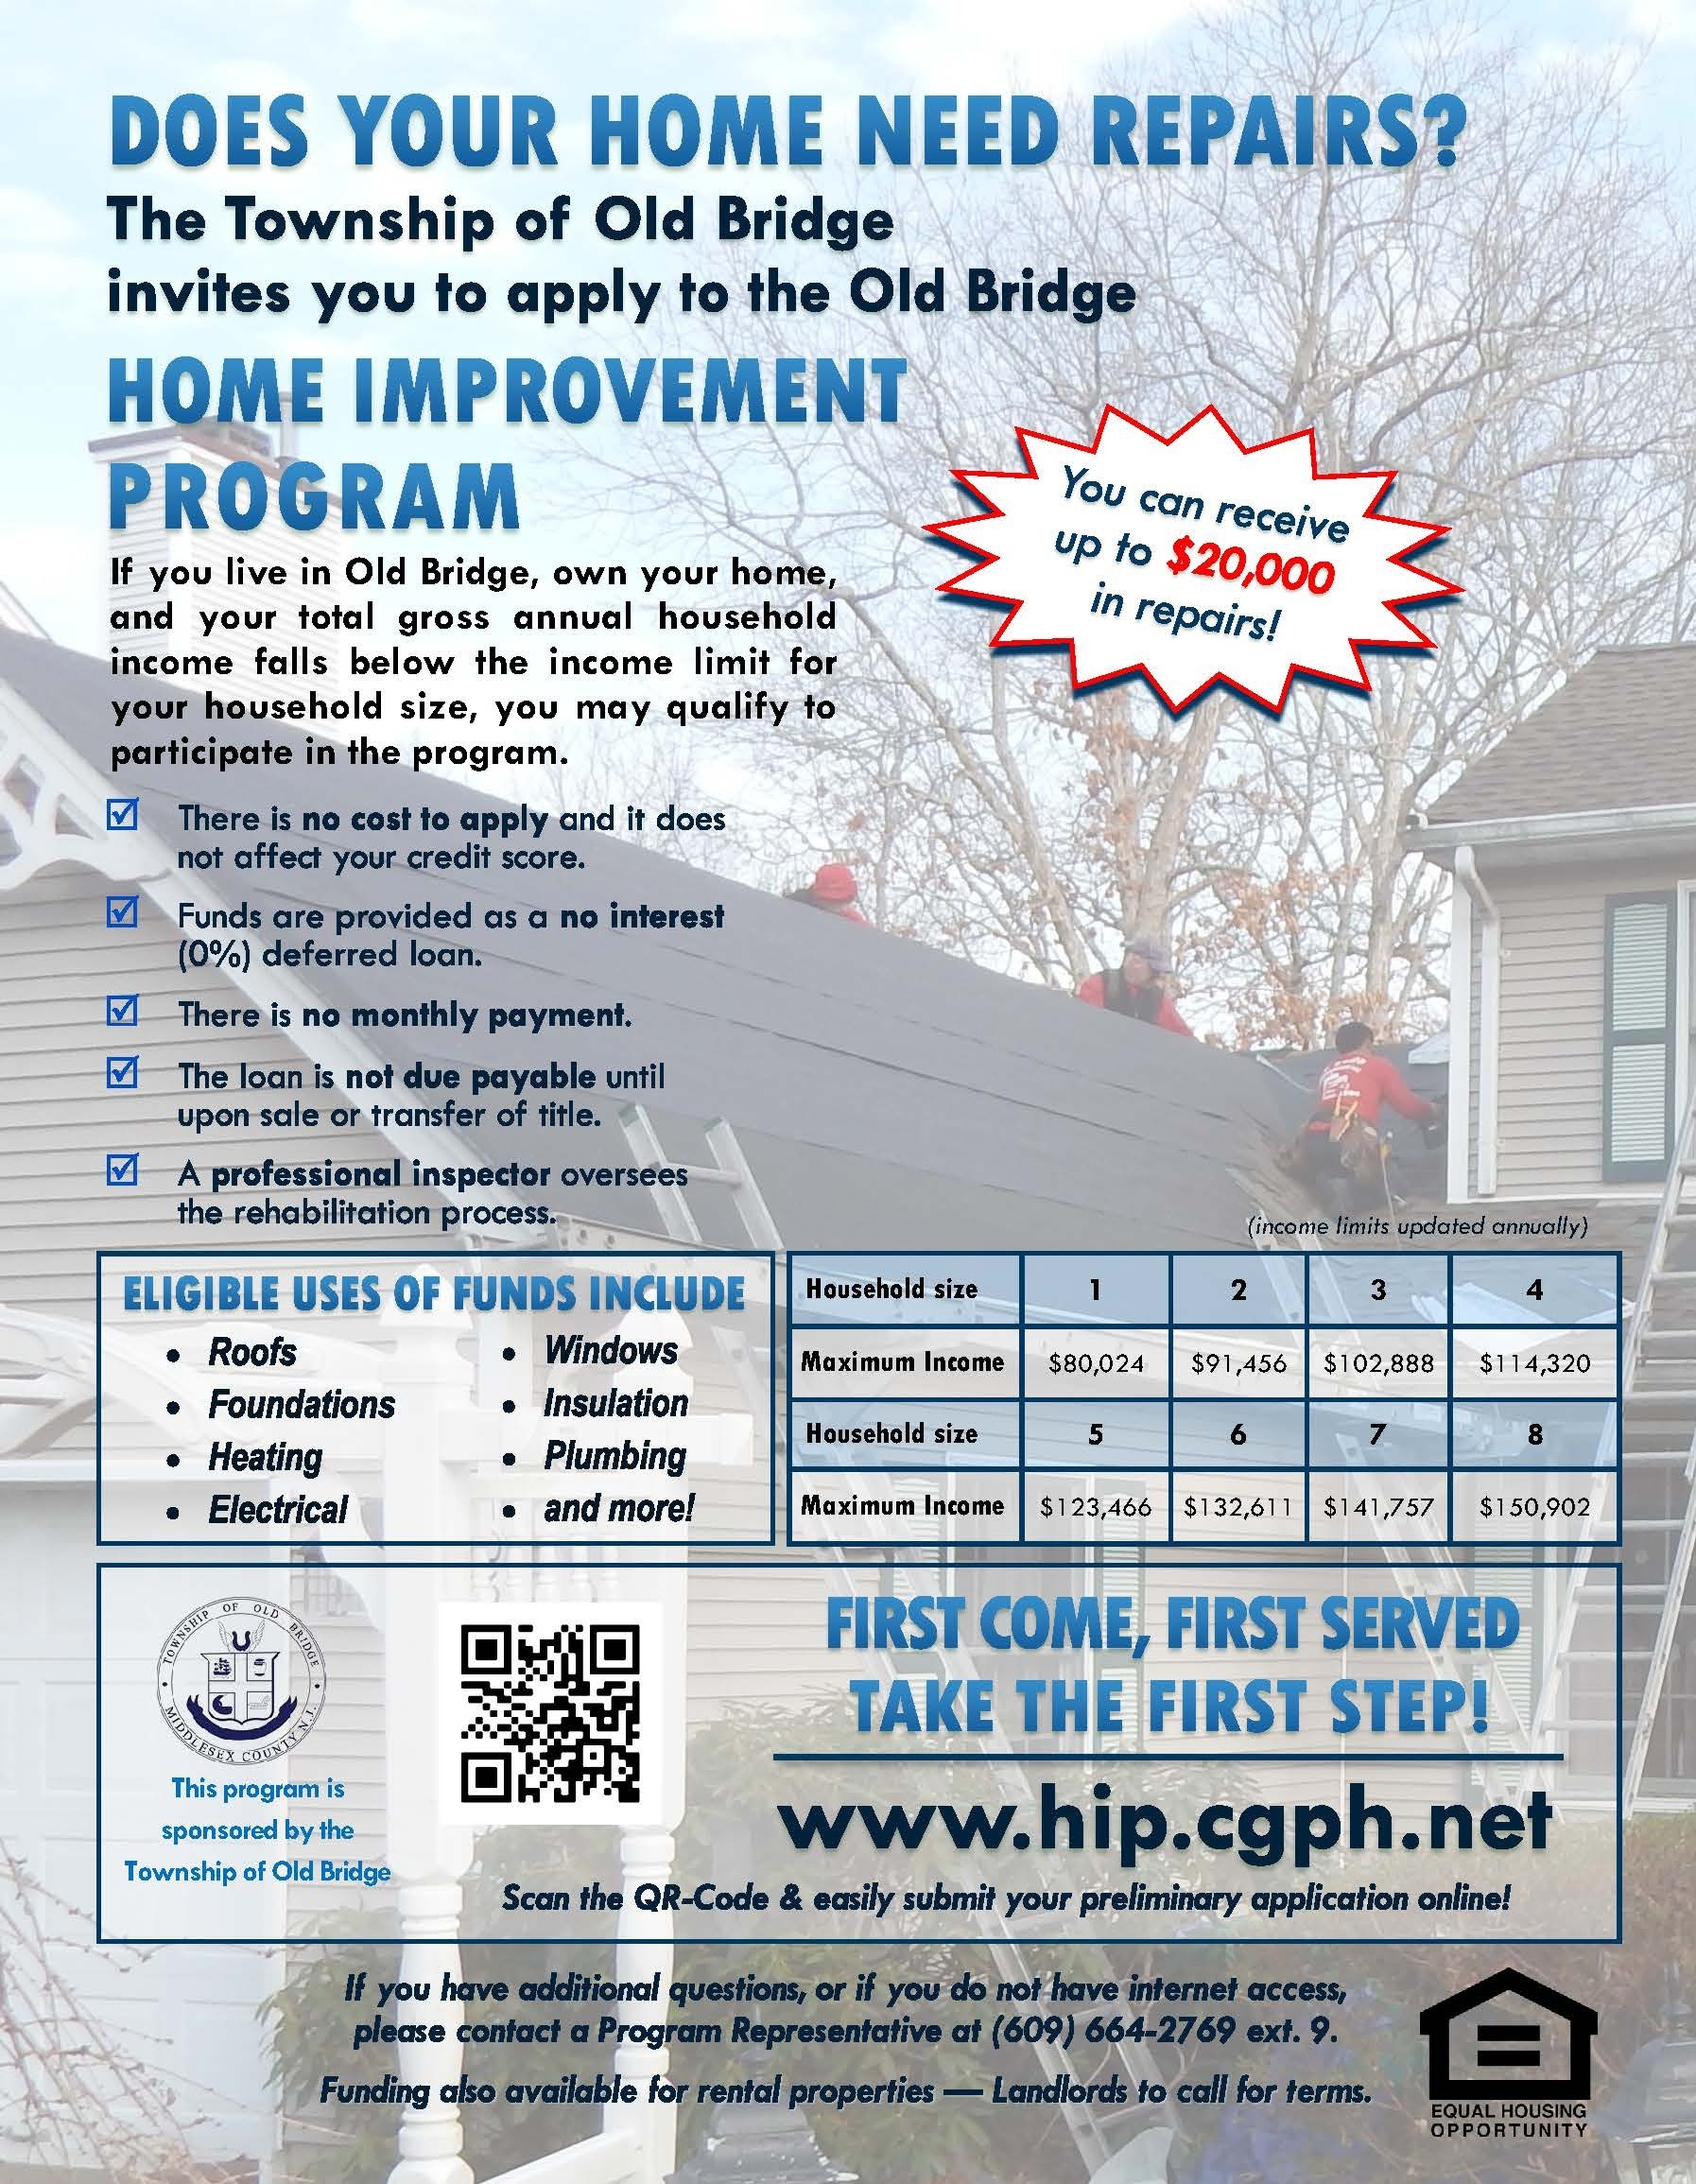 Does your home need repairs? The Township of Old Bridge invites you to apply to the Old Bridge Home Improvement Program. If you live in Old Bridge, own your home, and your total gross annual household income falls below the income limit for your household size, you may qualify to participate in the program. Visit www.hip.cgph.net for more information